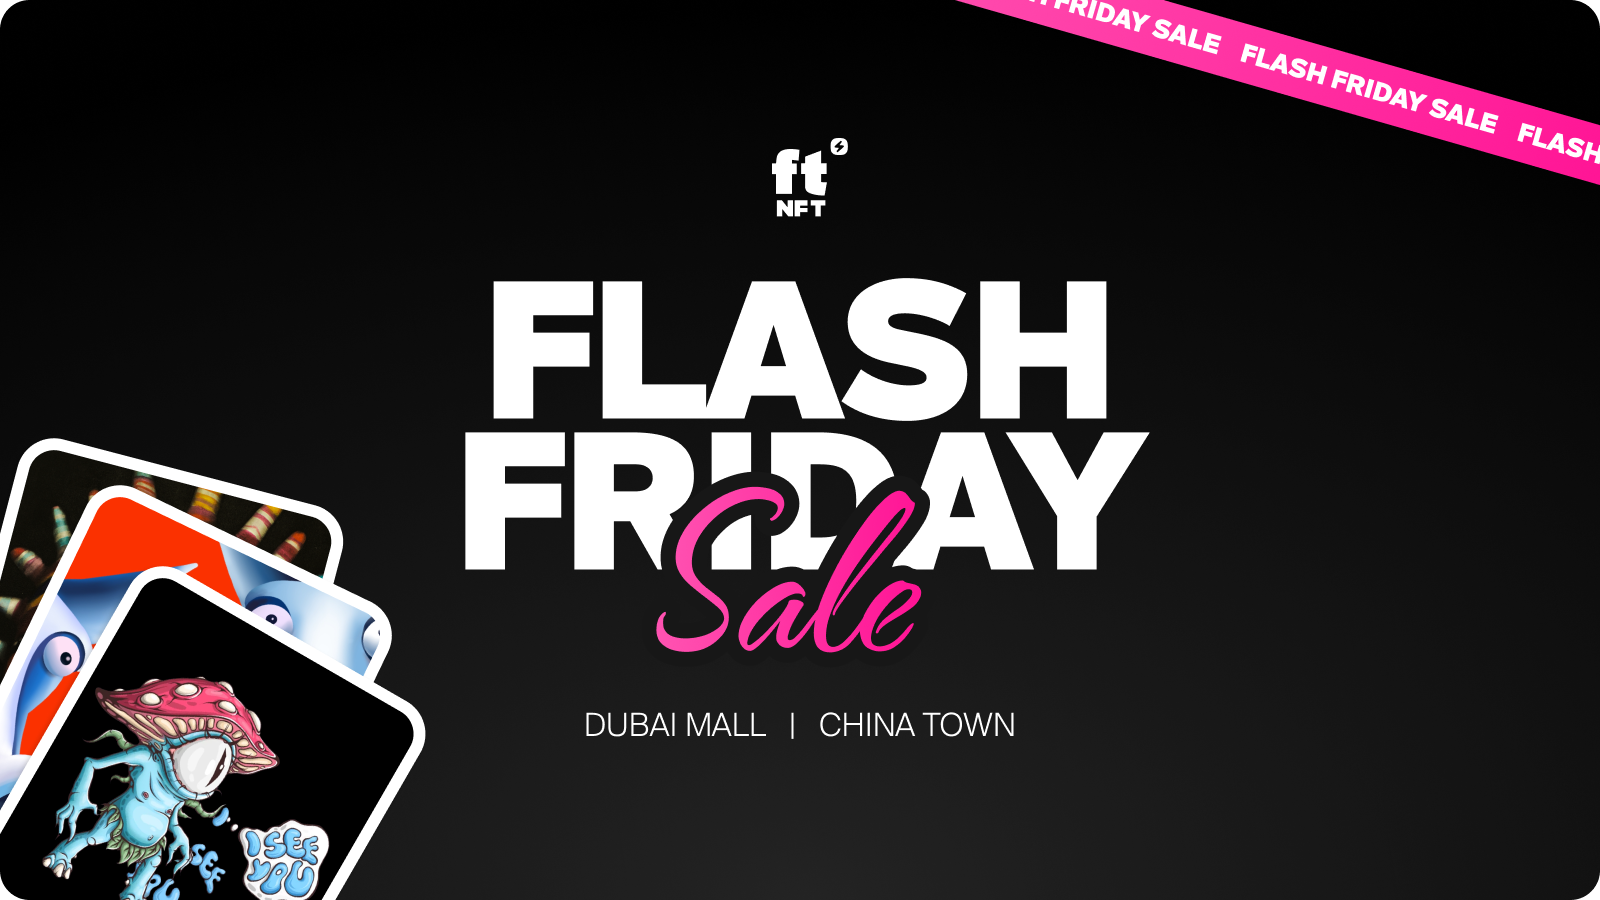 Unmissable Flash Friday Deals at ftNFT Phygital Space